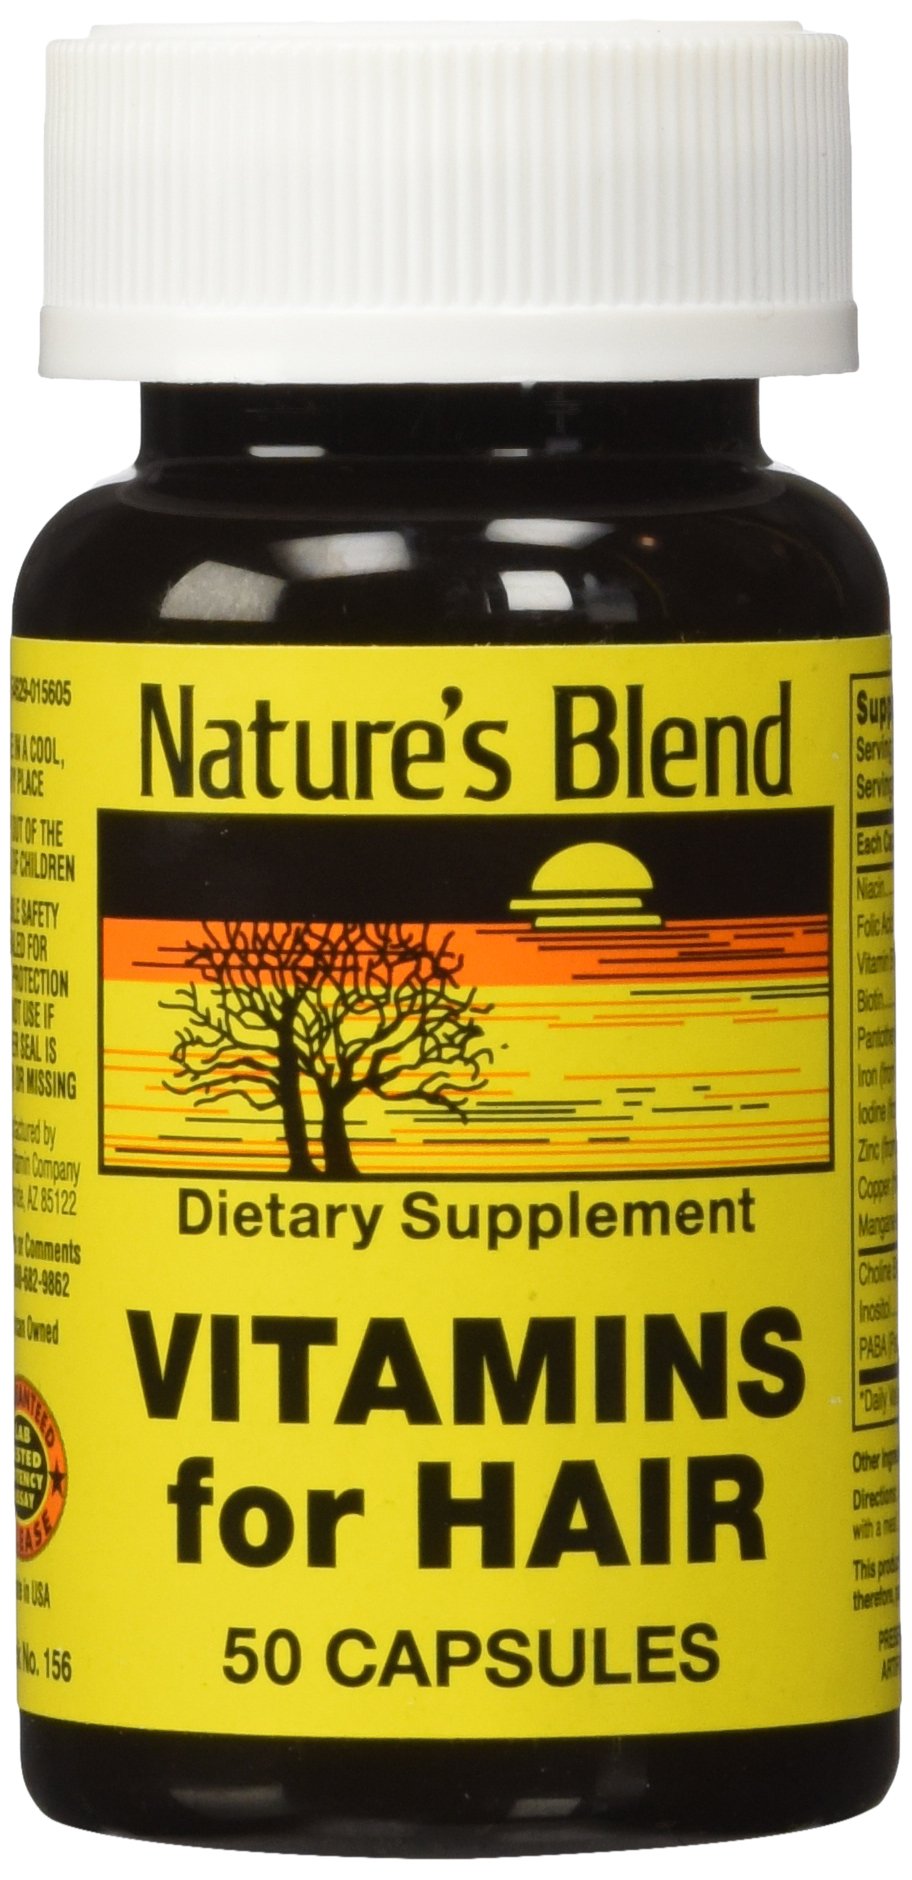 Nature's Blend Vitamins For Hair Capsules 50 Ct